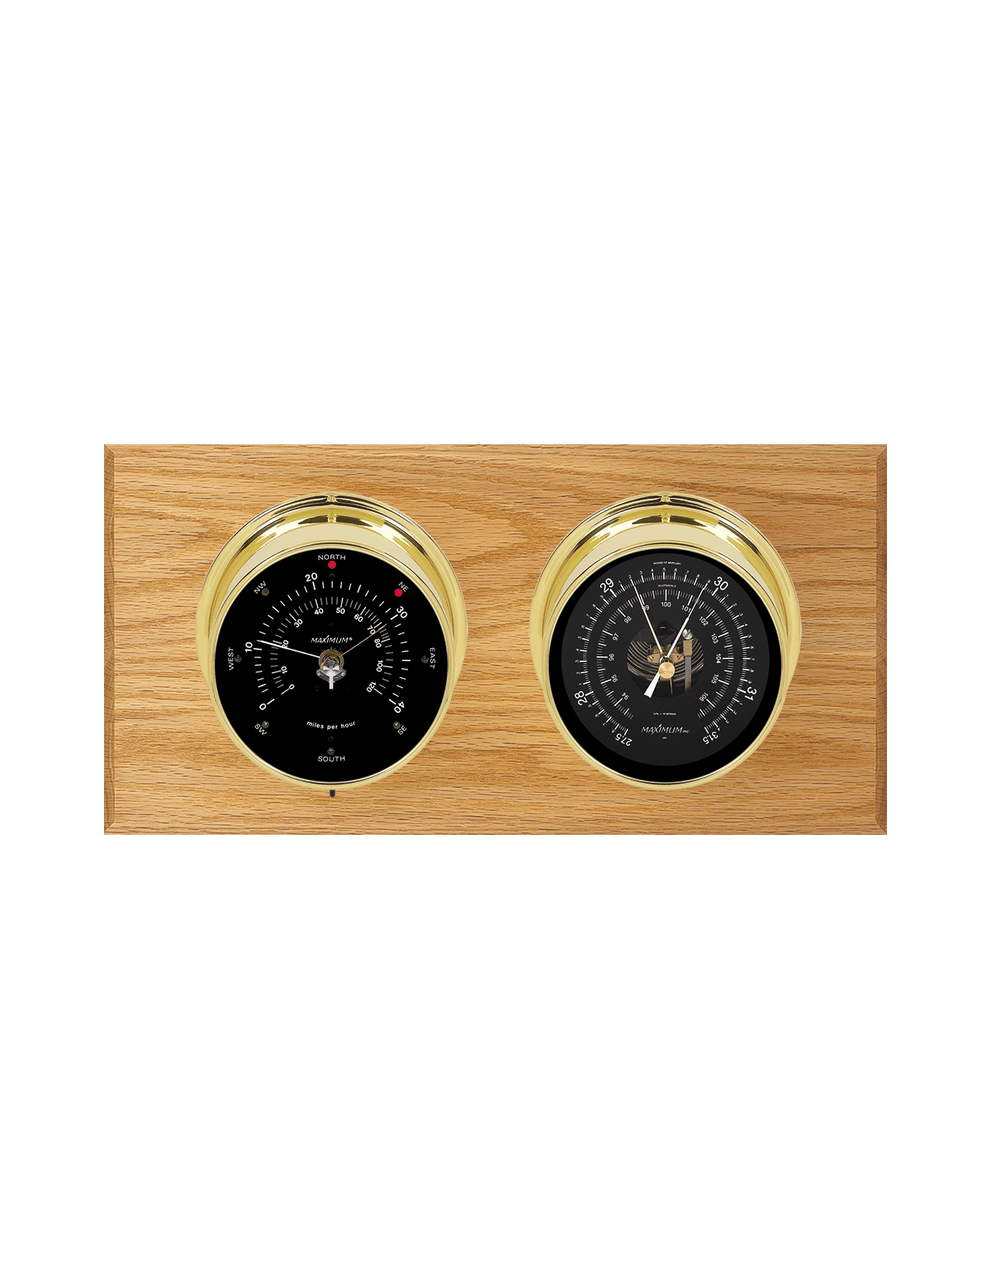 Hatteras Wind and Barometer Weather Station - 2 Instruments - PVD Brass Oak Wood - Black Face - 2 Scales -Reads 0-120 mph